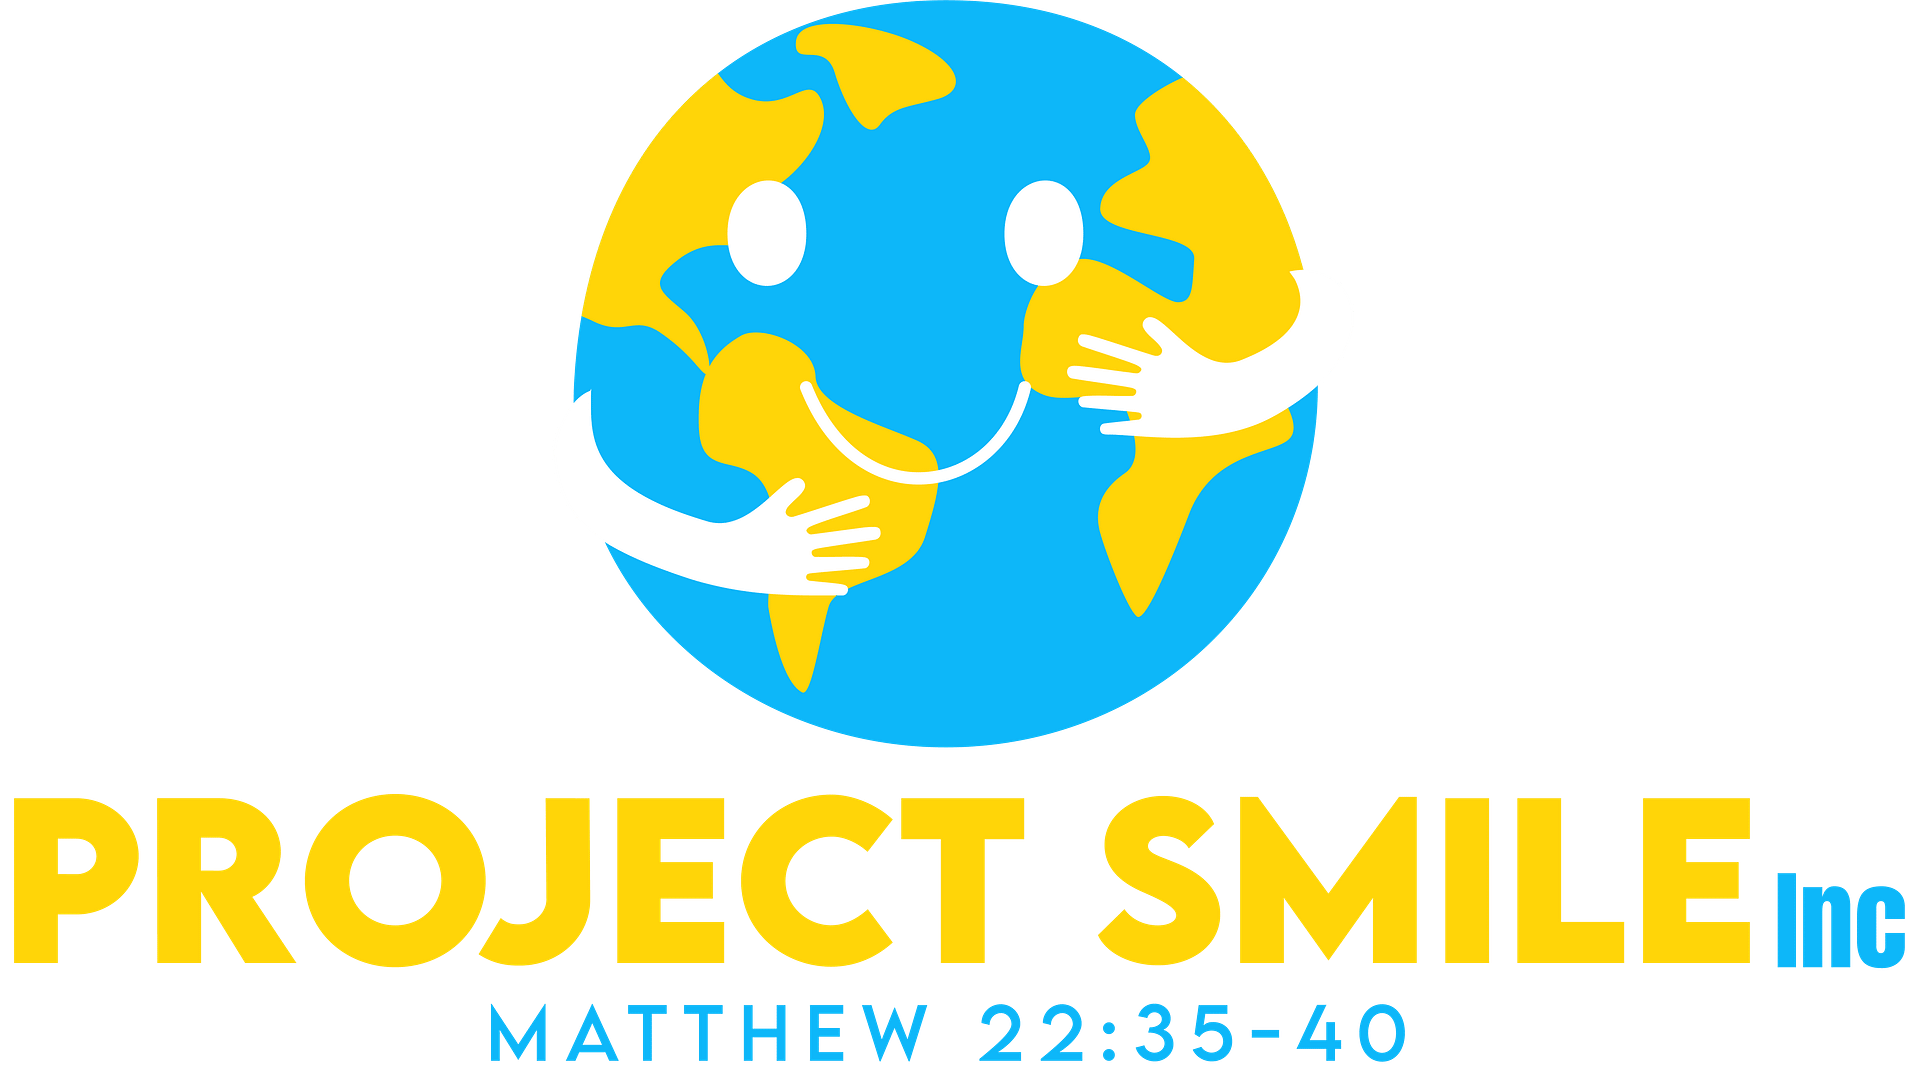 Projects Smiles